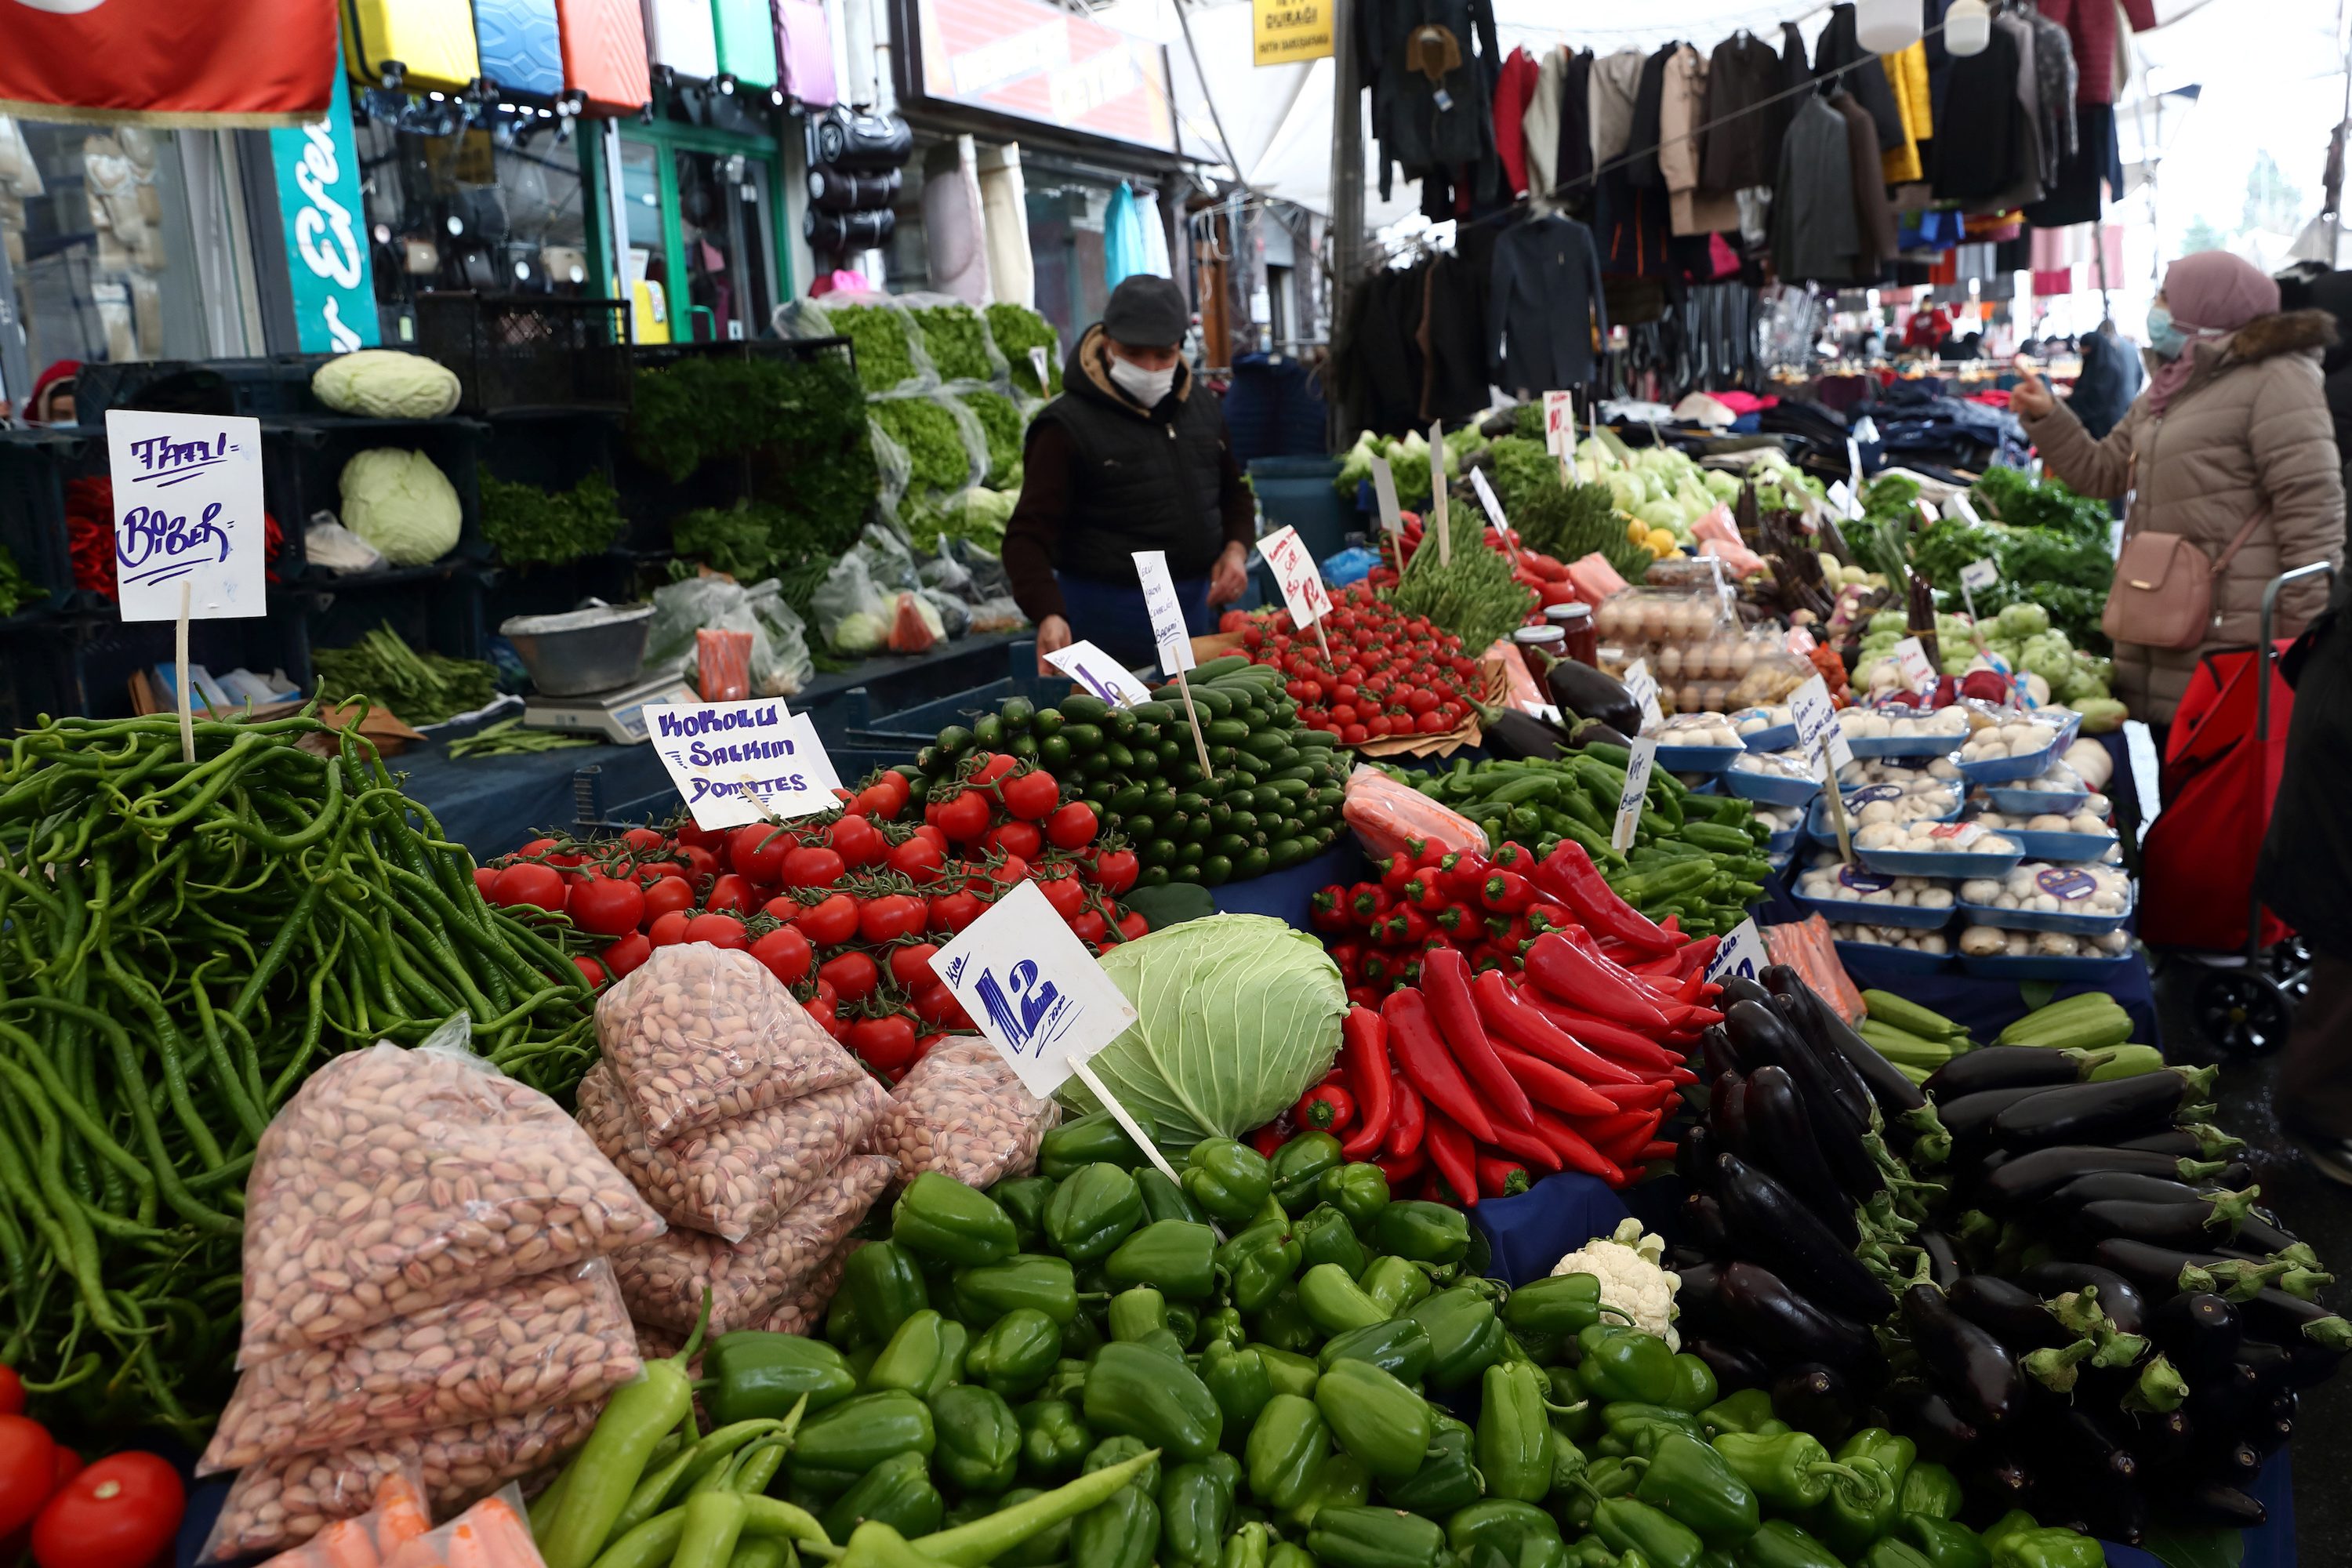 Less for more in Turkey: Costly food starves economic rebound